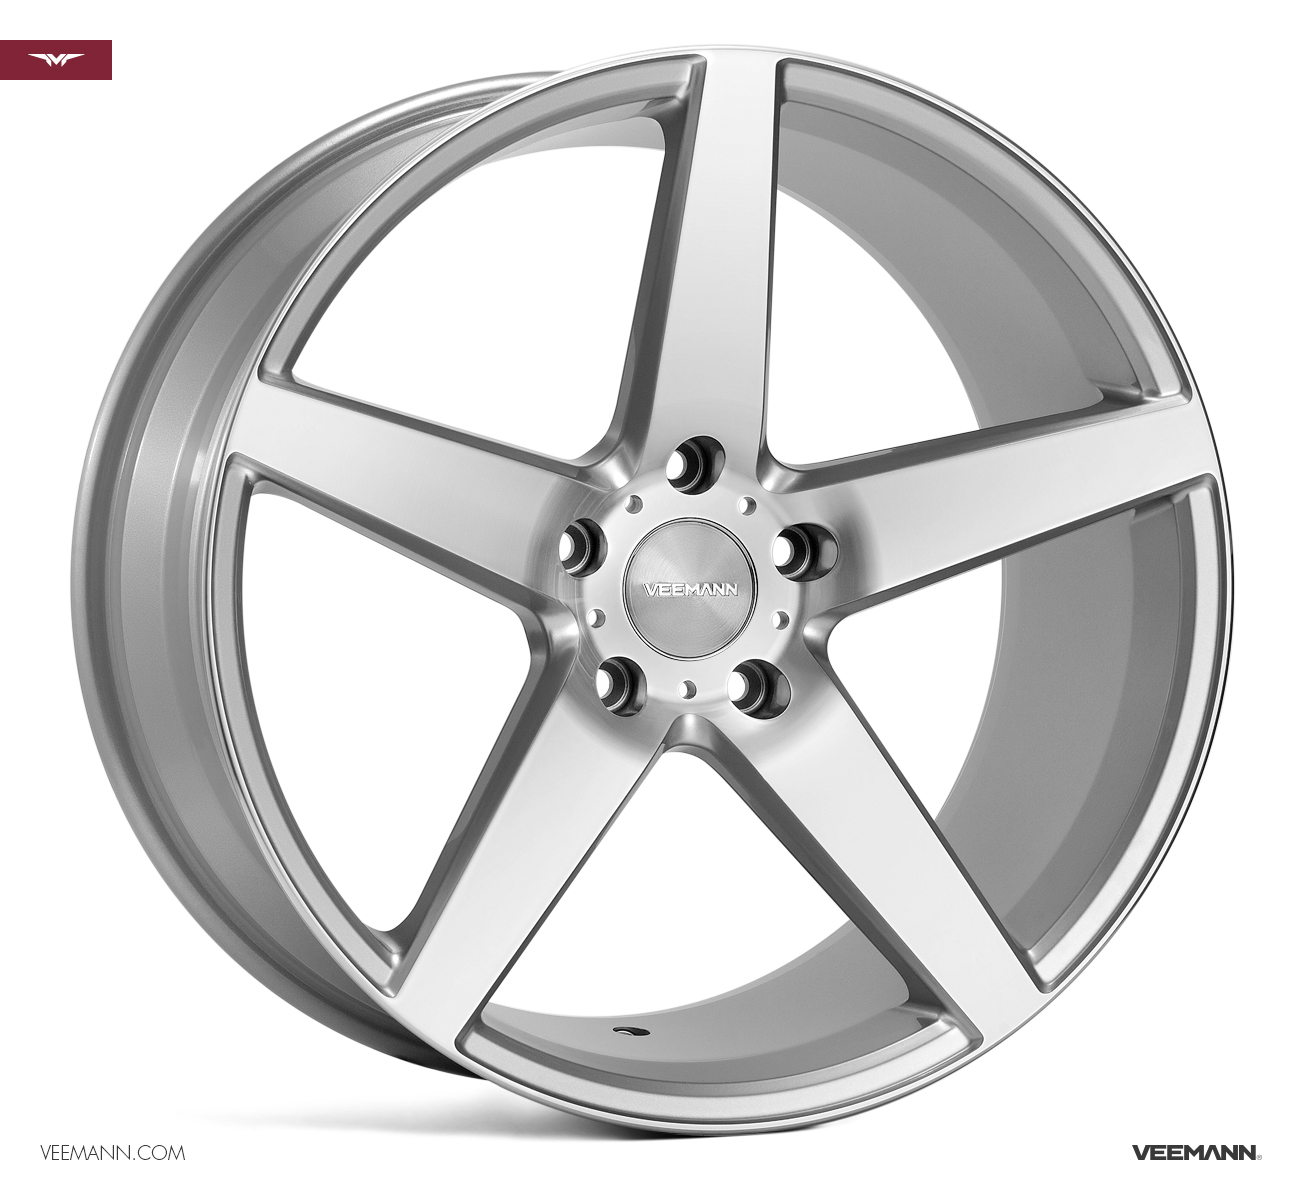 NEW 20" VEEMANN V-FS8 5 SPOKE CONCAVE ALLOY WHEELS IN SILVER WITH POLISHED FACE, WIDER 10" REARS et38/42